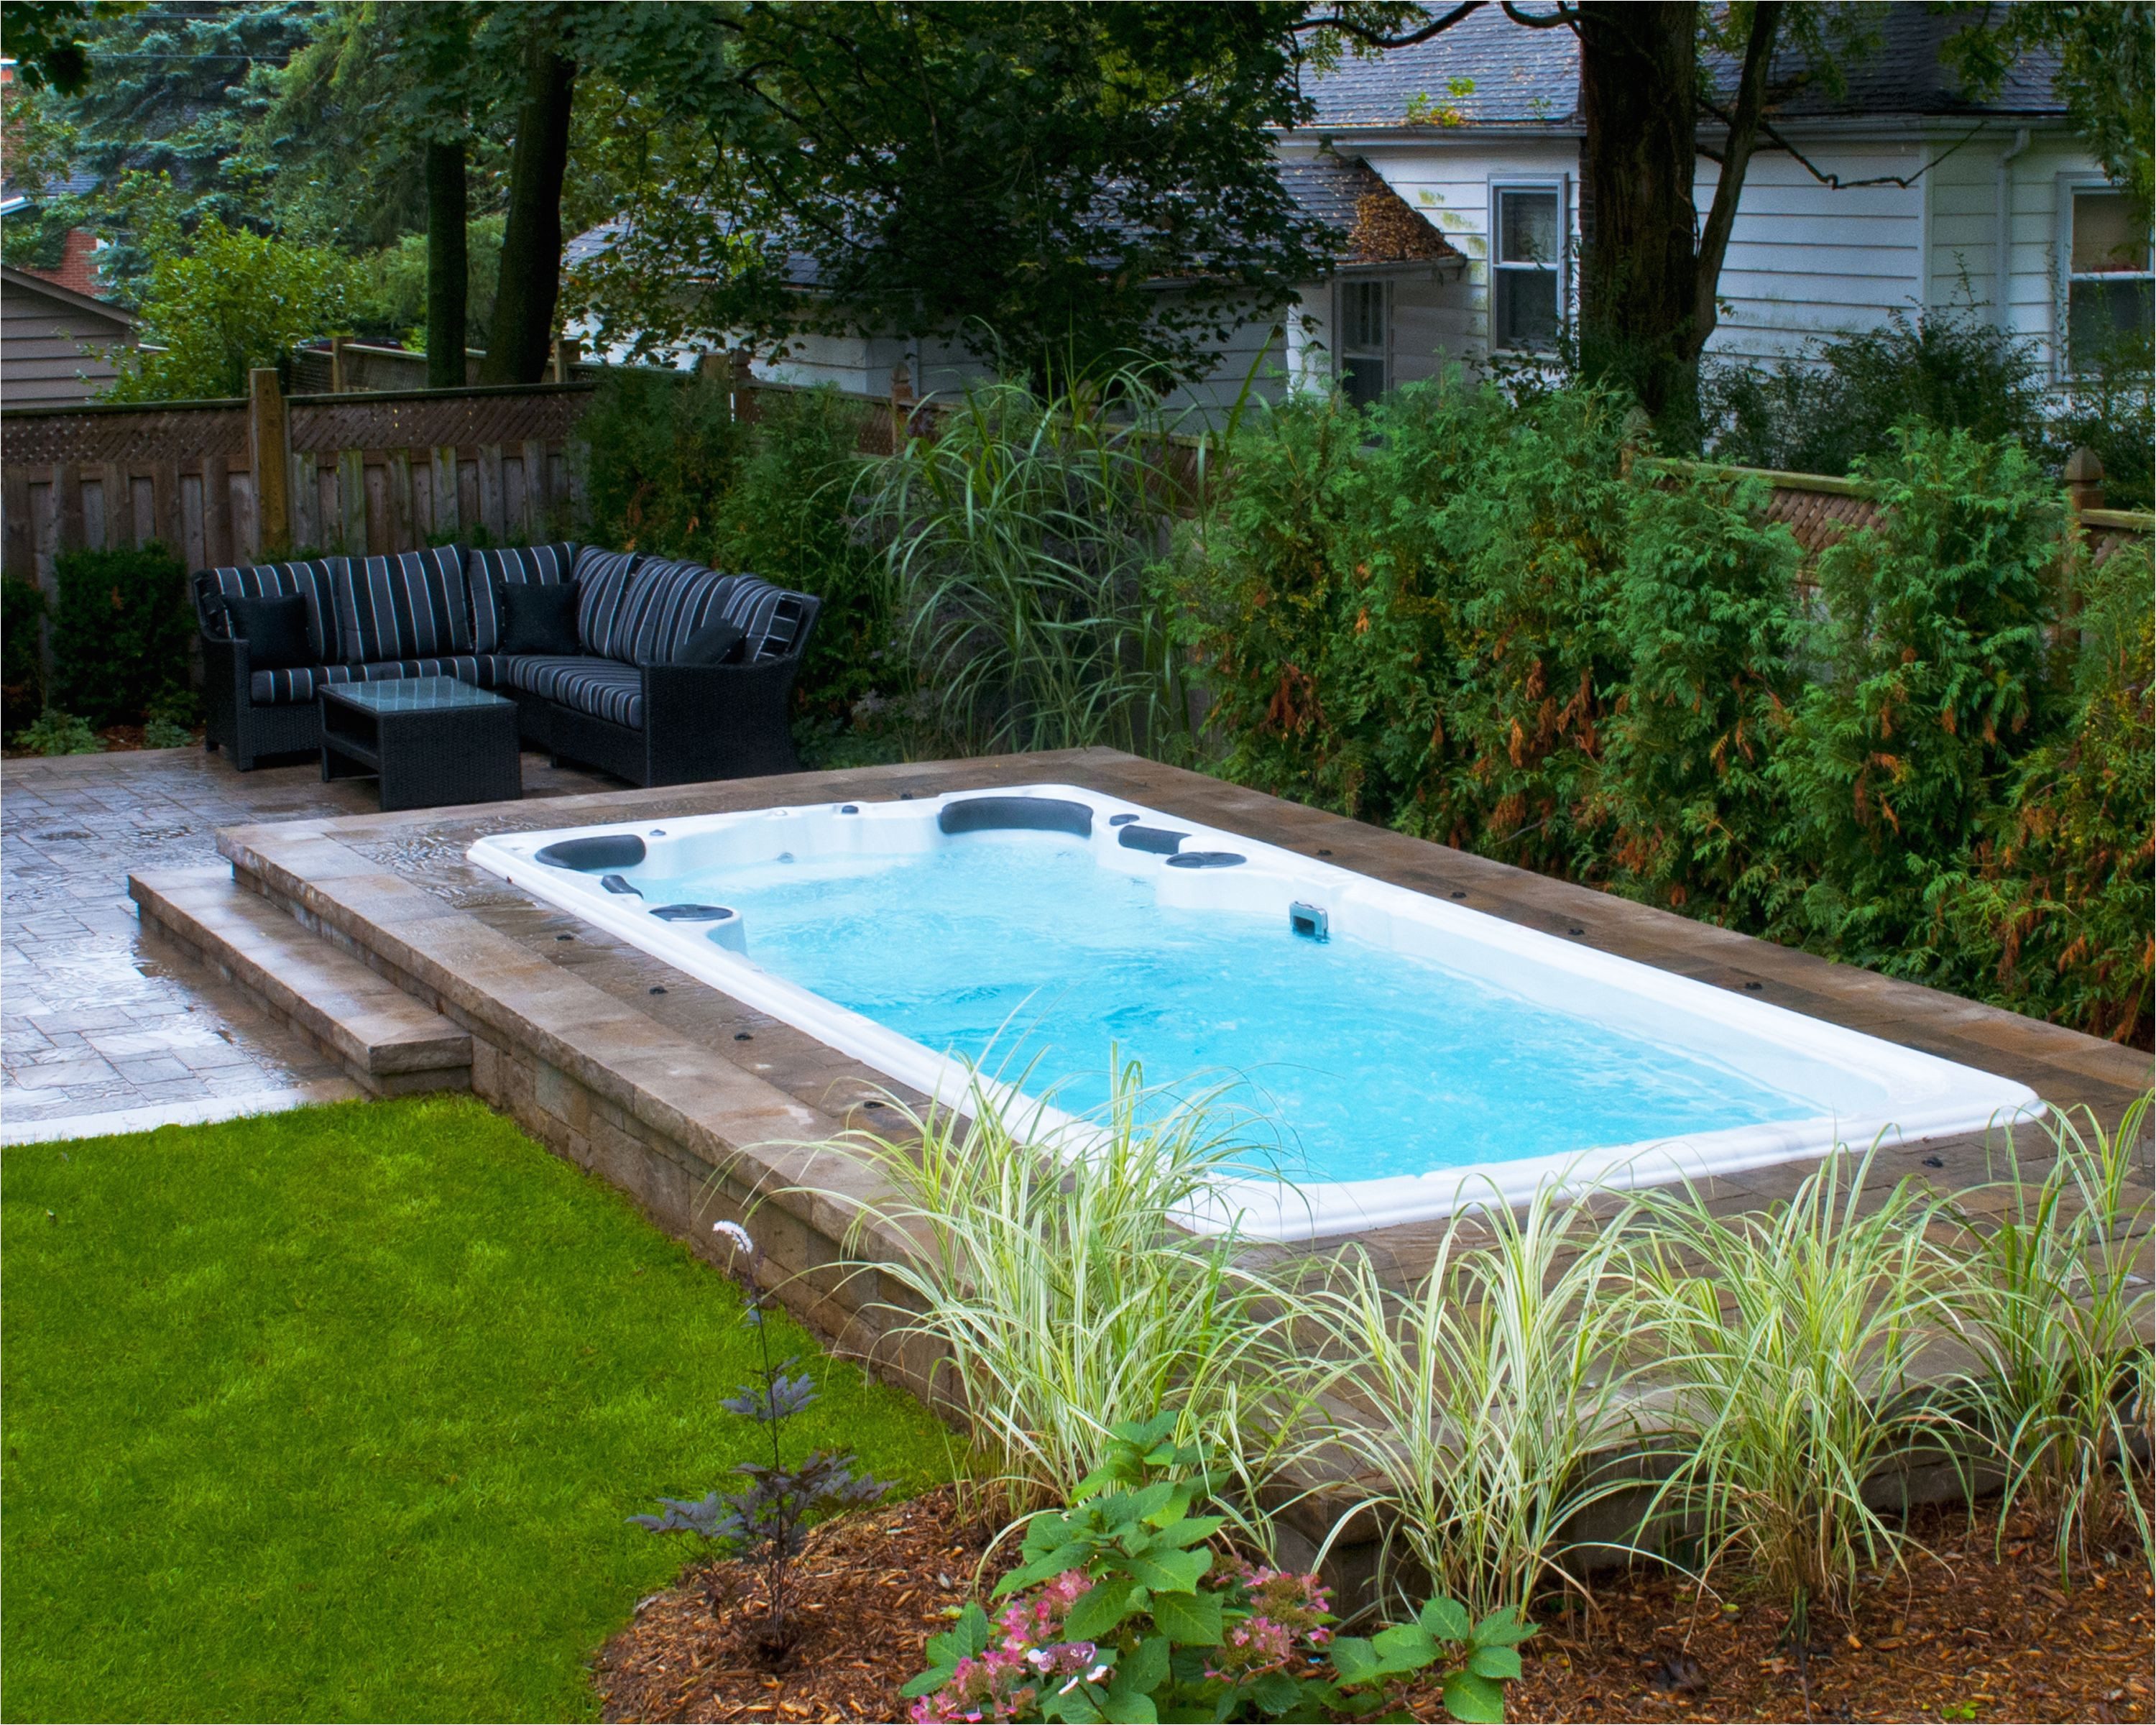 hydropool self cleaning swim spa installed in ground with stone deck learn more about hydropool